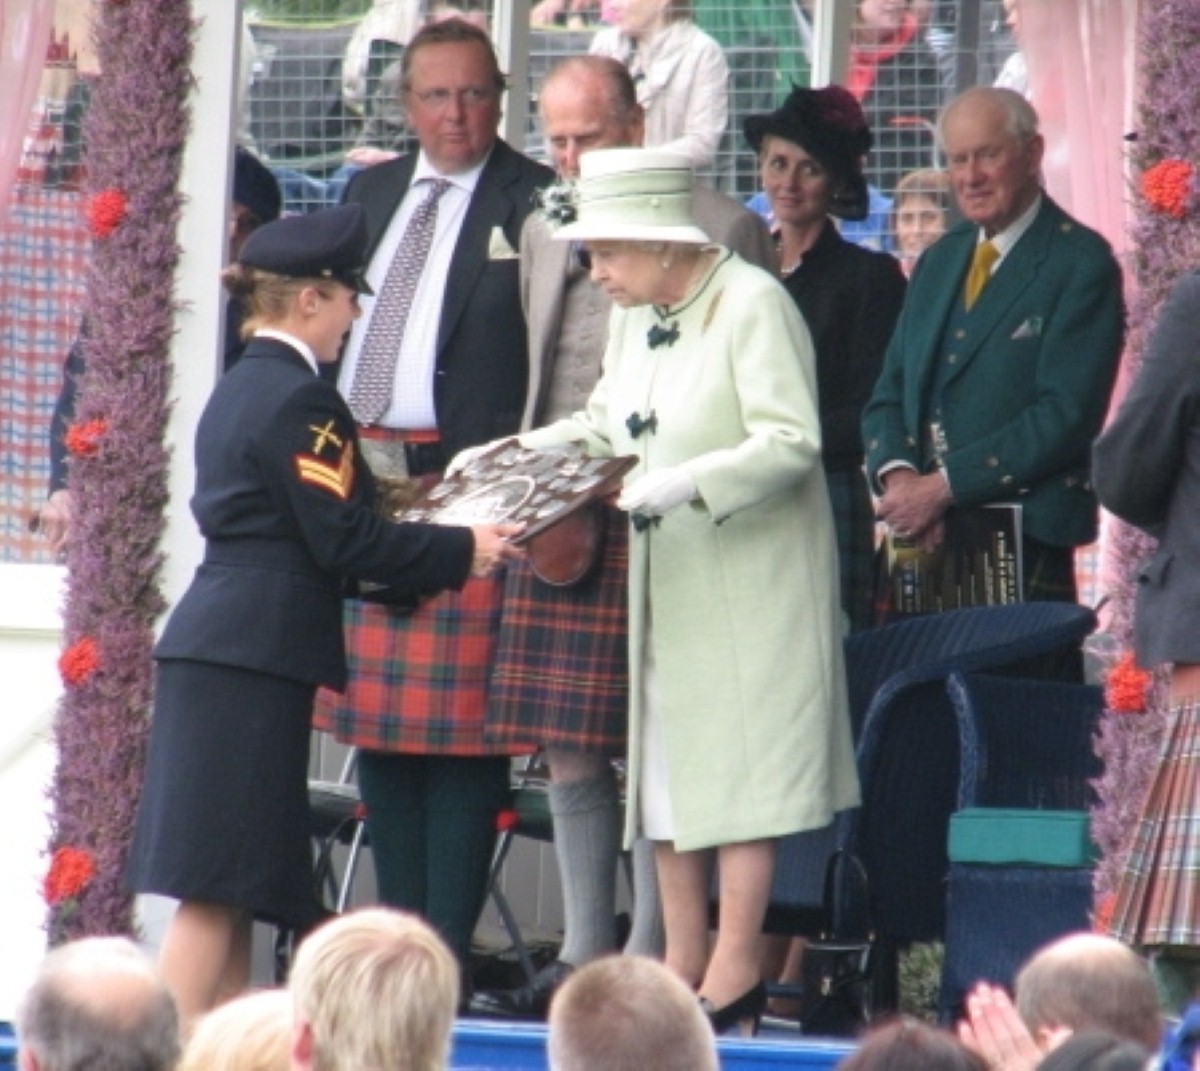 Robert W Reed took this photo of Her Majesty presenting an award at the Braemar Gathering